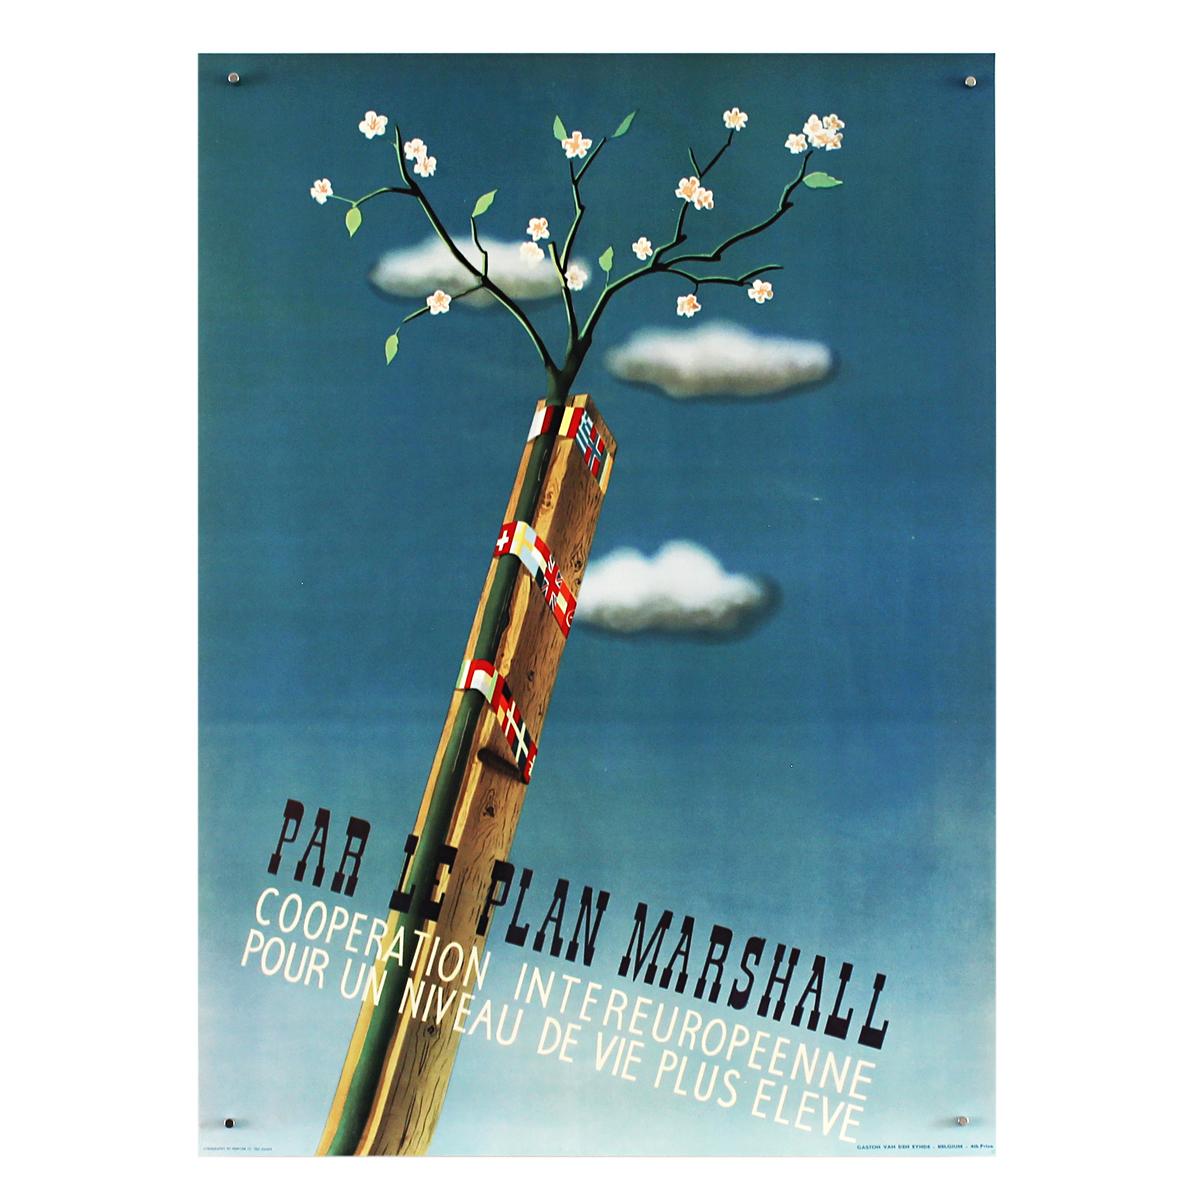 25 Original Marshall Plan Posters, a Complete Collection of the Contest Winners 6